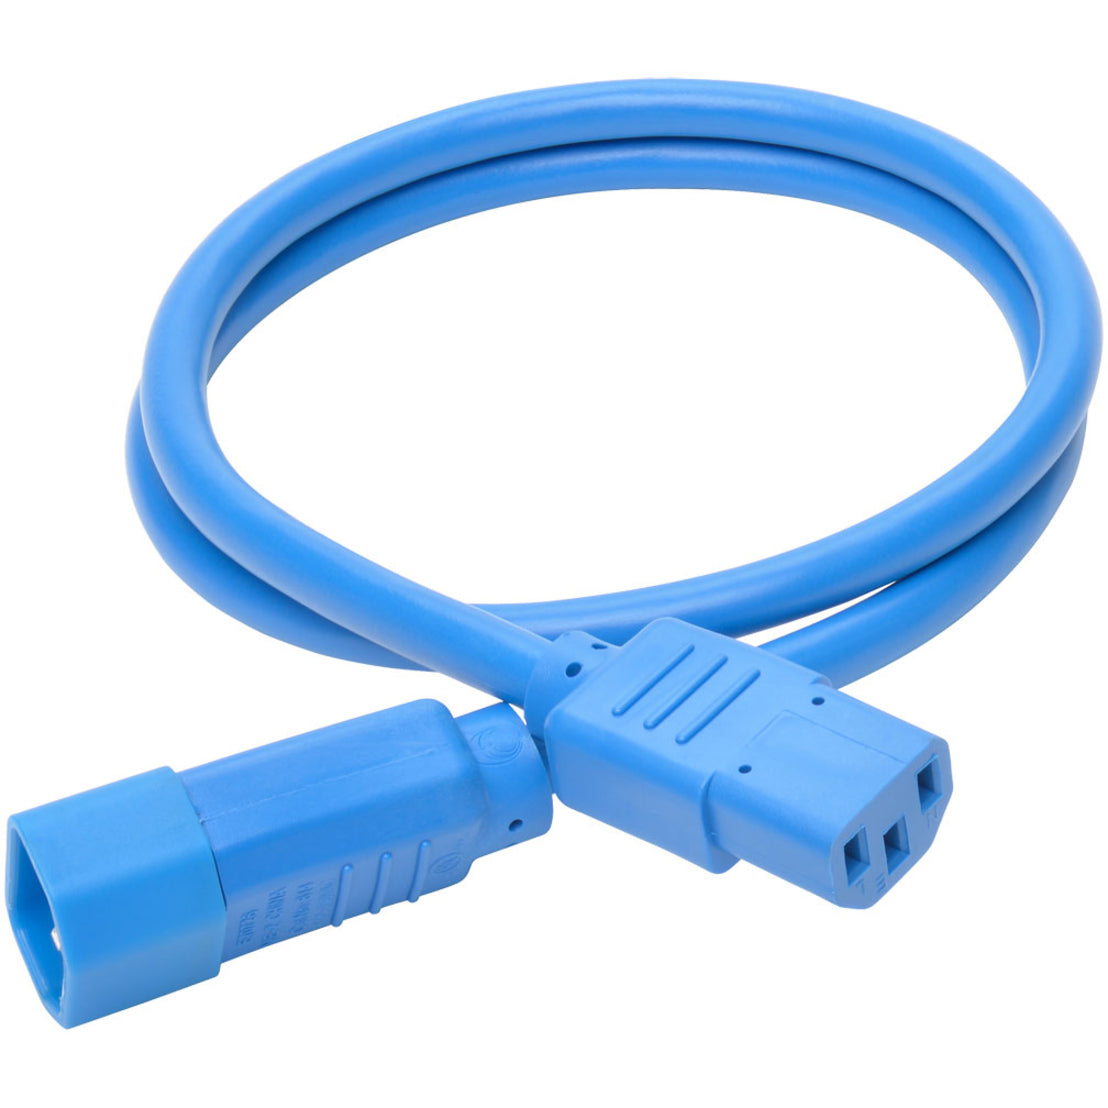 Tripp Lite P005-003-ABL Power Extension Cord, 15A, 14 AWG, 3 ft, Blue